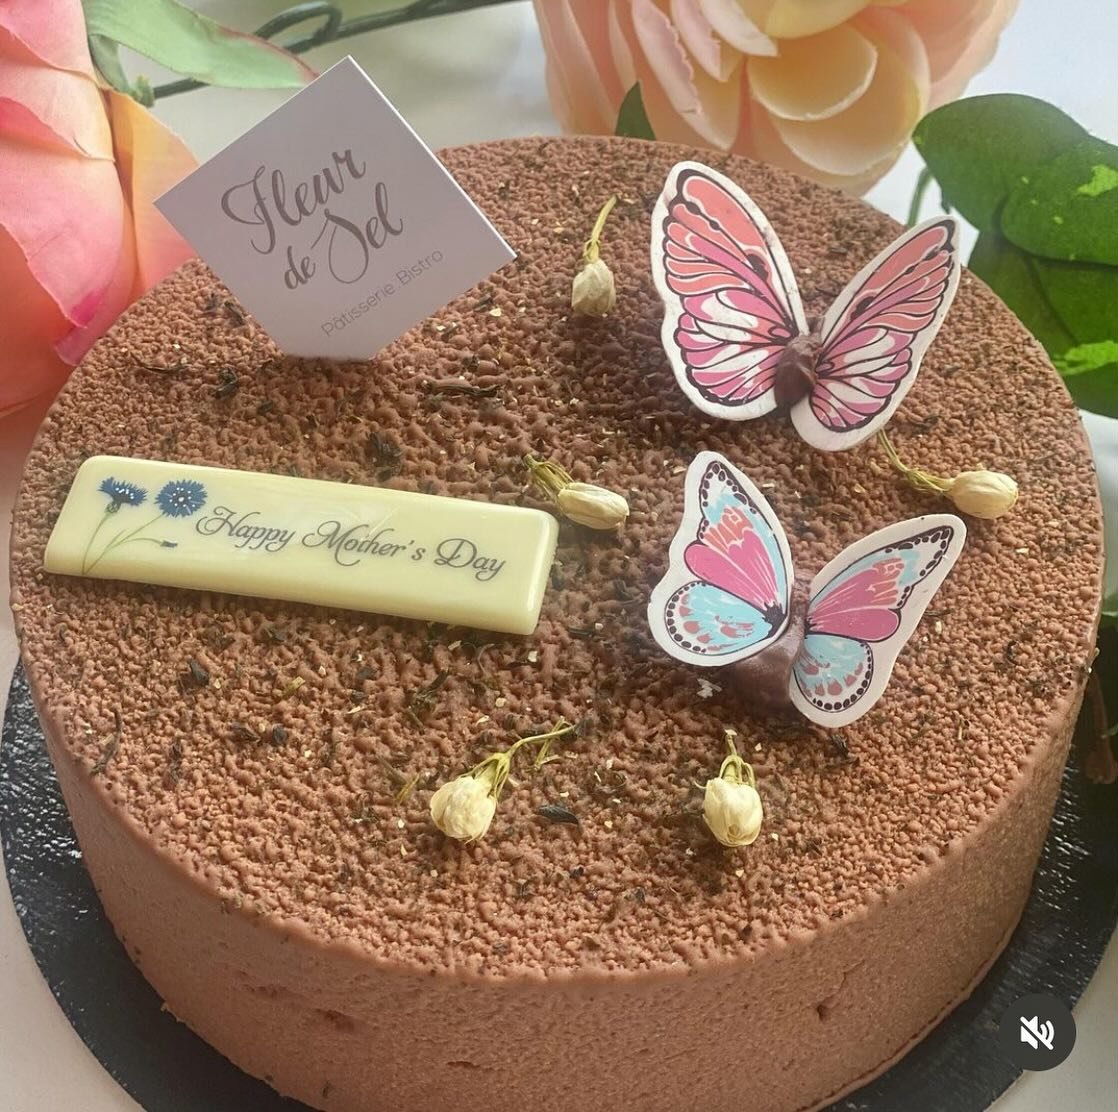 Our Mother&rsquo;s Day Specials;
- Chocolate Jasmine cake. Available in 6inch, 8inch or 10inch.
- Rose, lychee and raspberry. Available in 6inch, 8inch or 10inch.
- Lemon, verbena and strawberry. Available in One size
Make sure to place your orders b